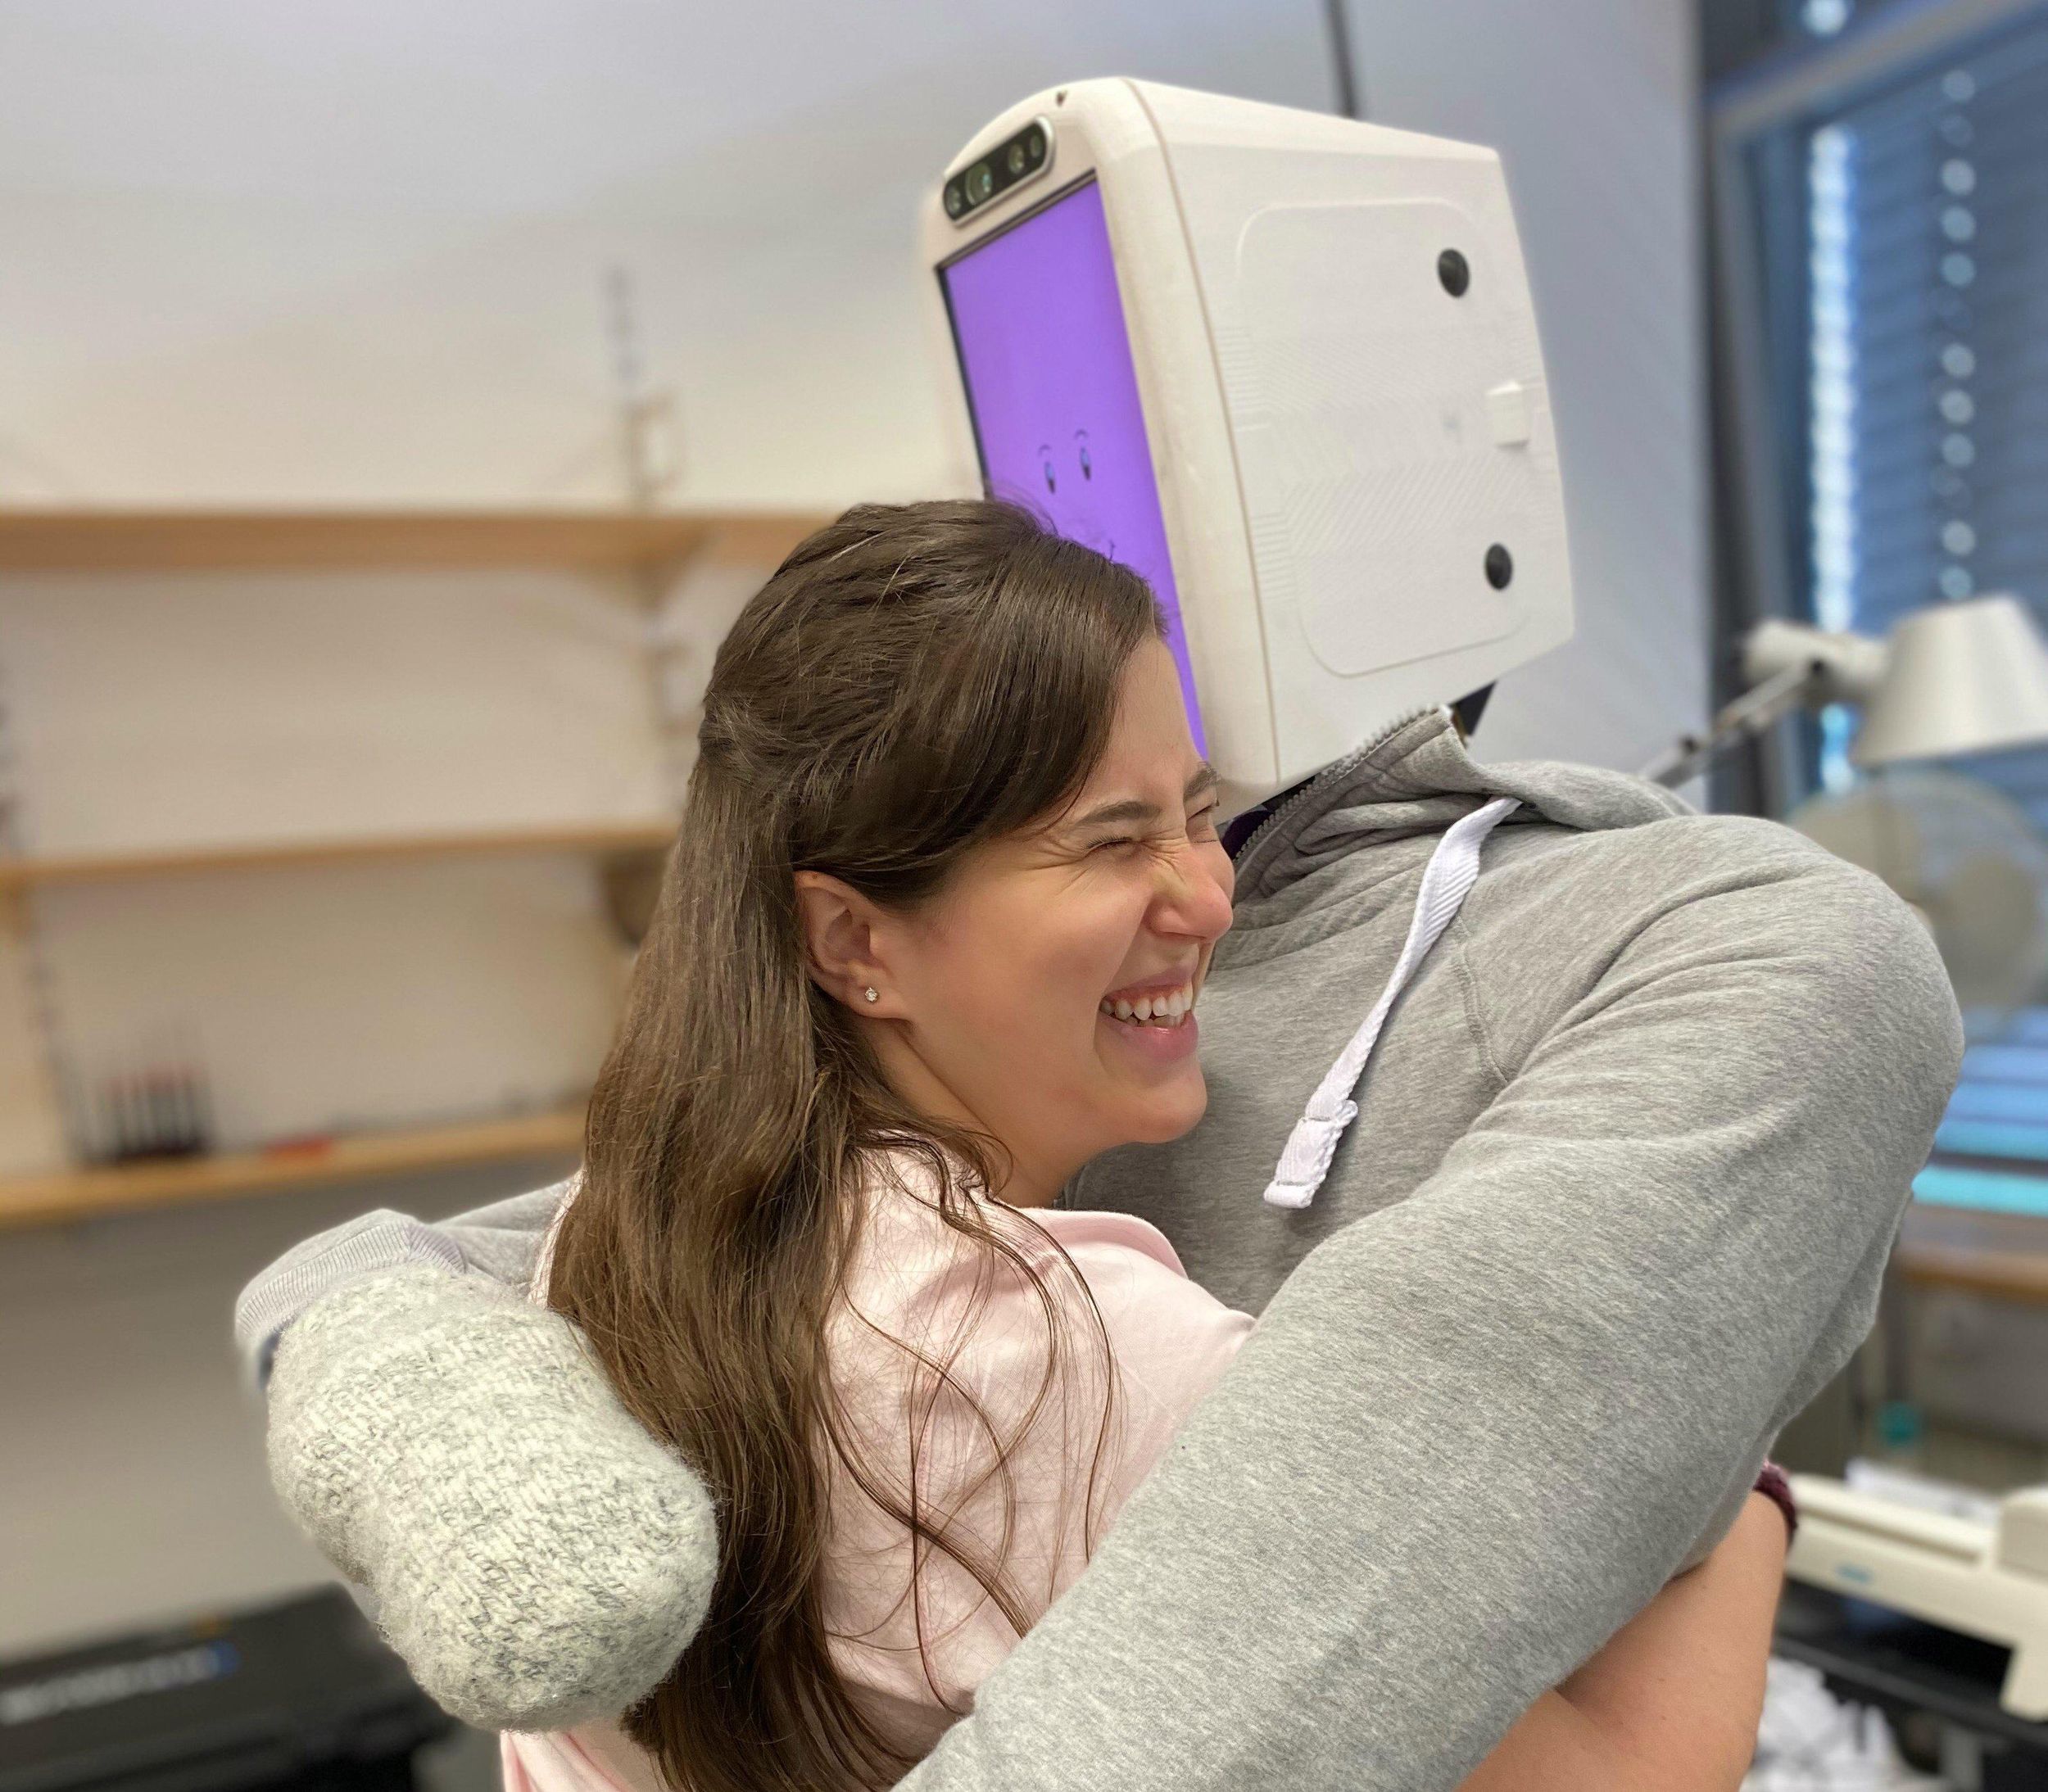 A smiling woman hugs a robotic torso with a soft grey sweatshirt. The robot's head has a purple computer screen with a smiling face.